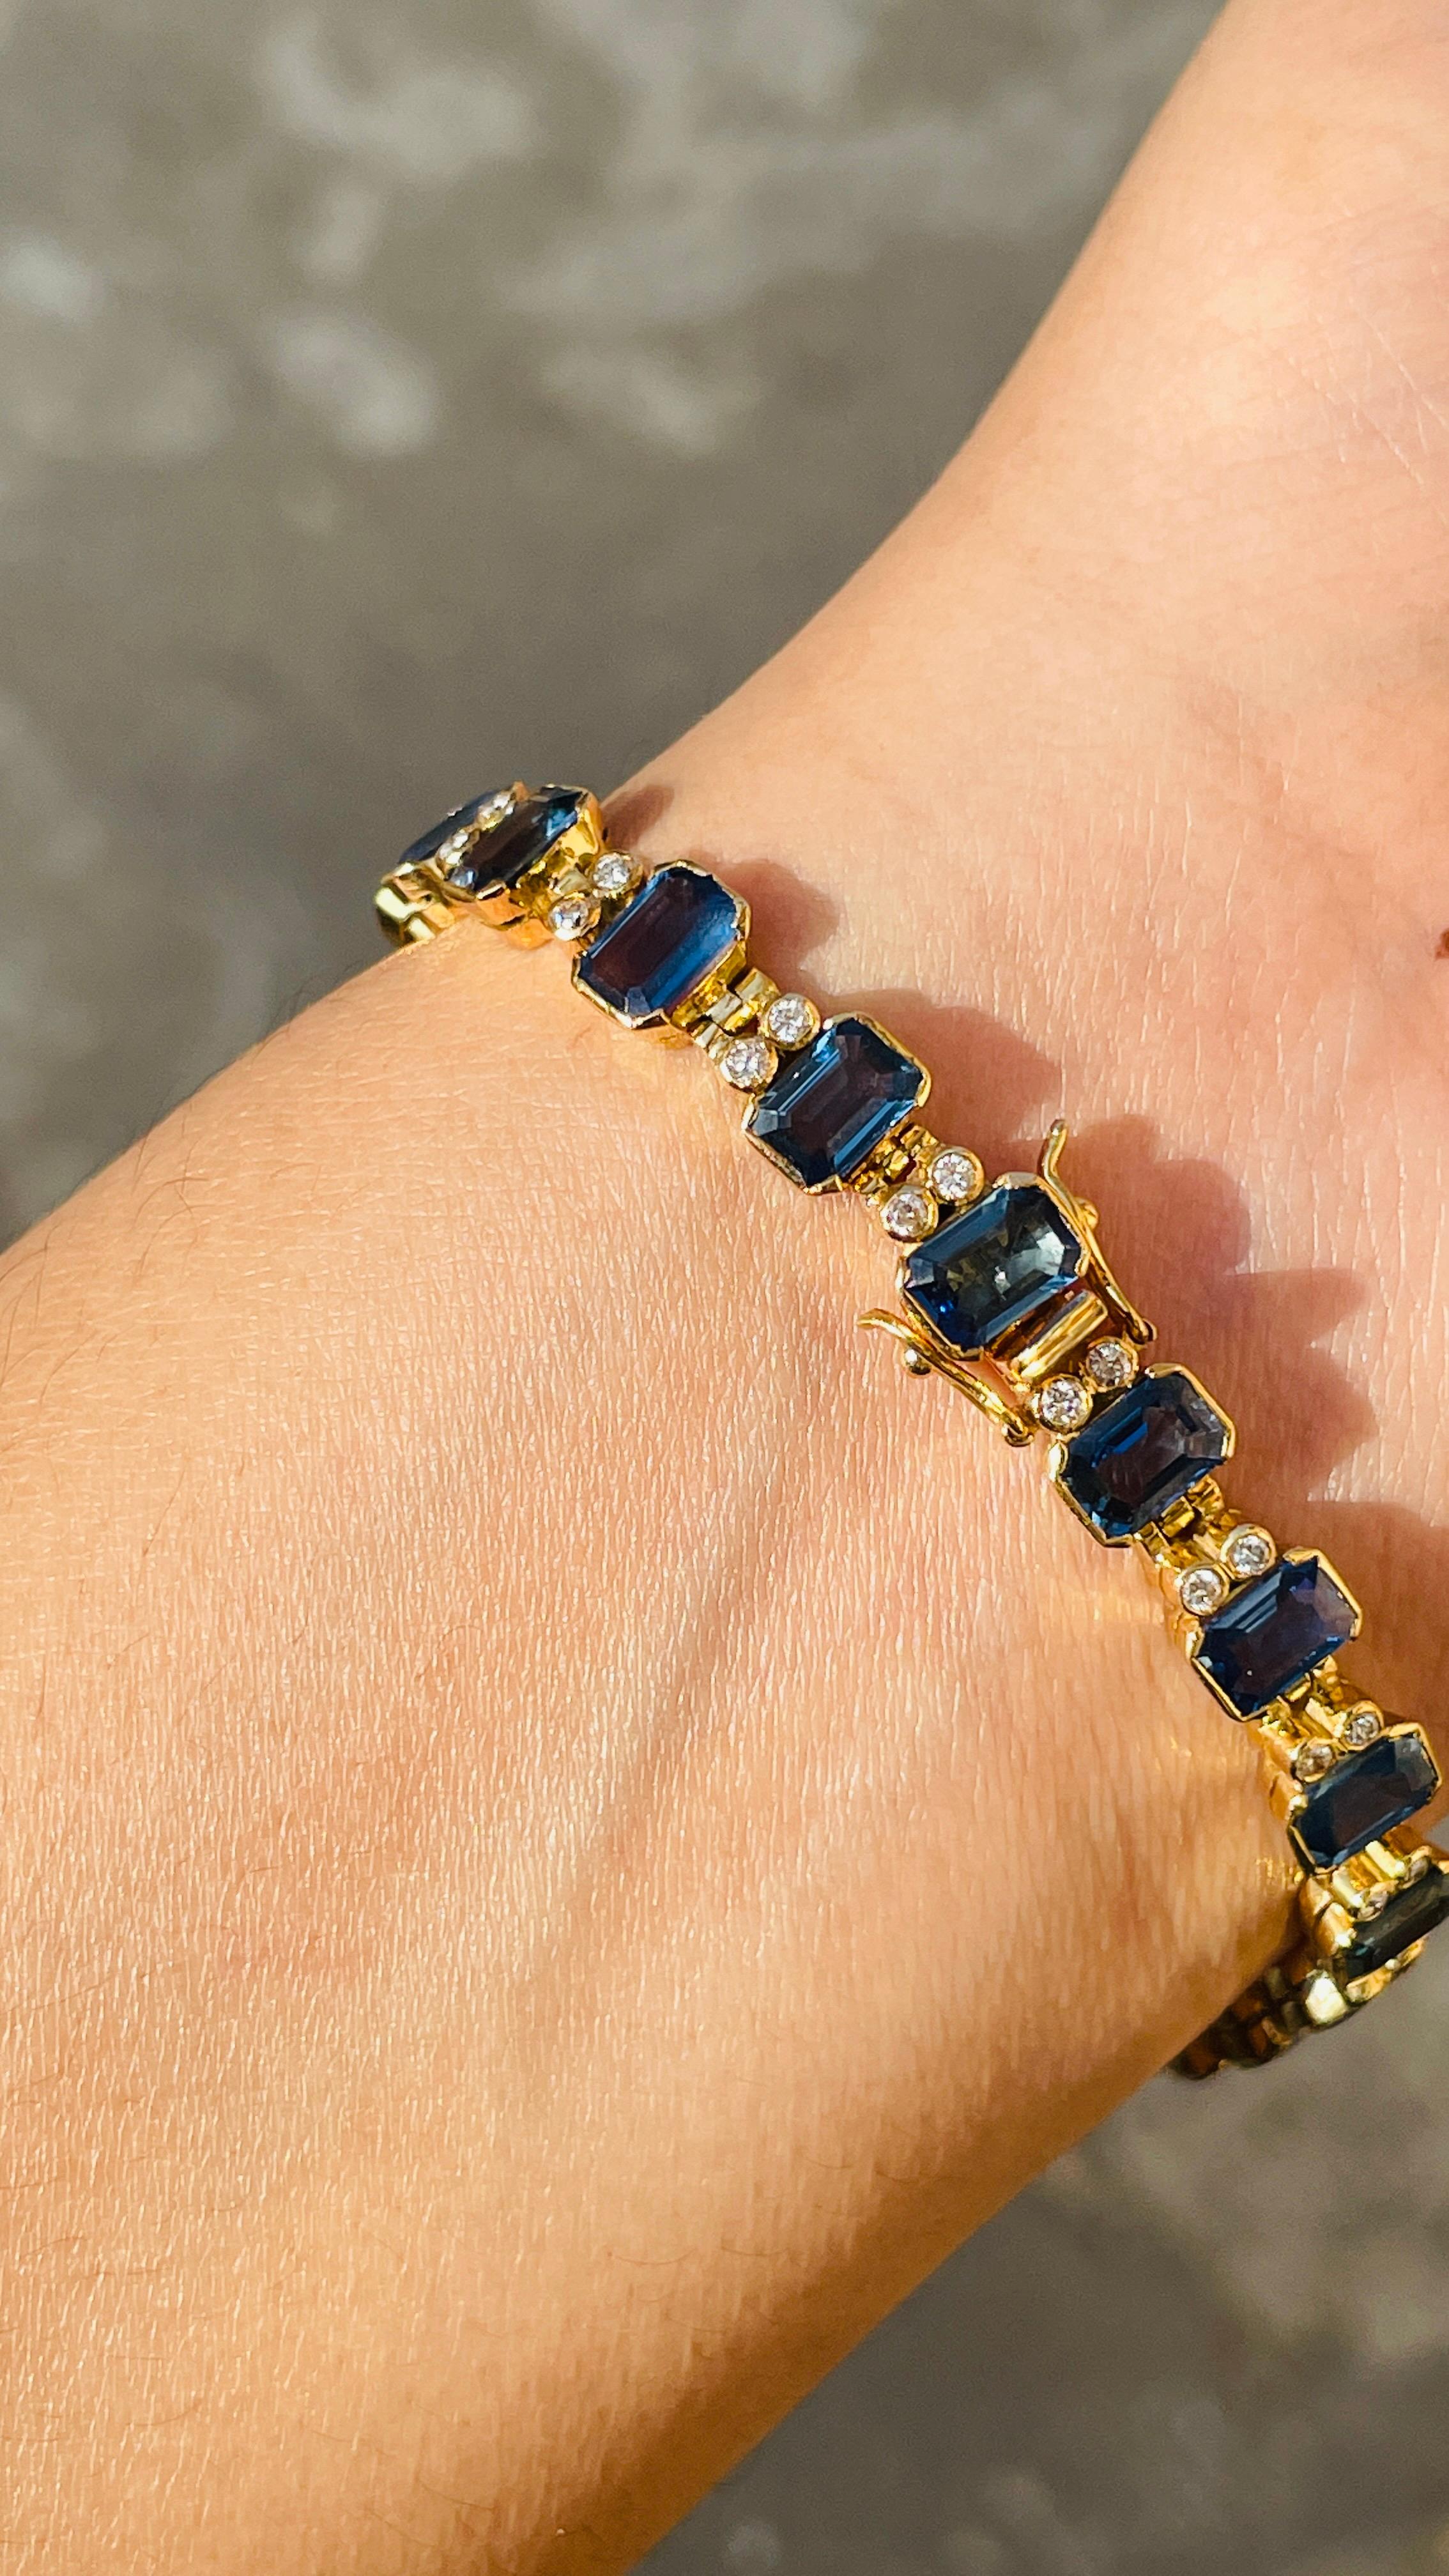 Blue Sapphire bracelet in 18K Gold. It has a perfect octagon cut gemstone to make you stand out on any occasion or an event.
A tennis bracelet is an essential piece of jewelry when it comes to your wedding day. The sleek and elegant style